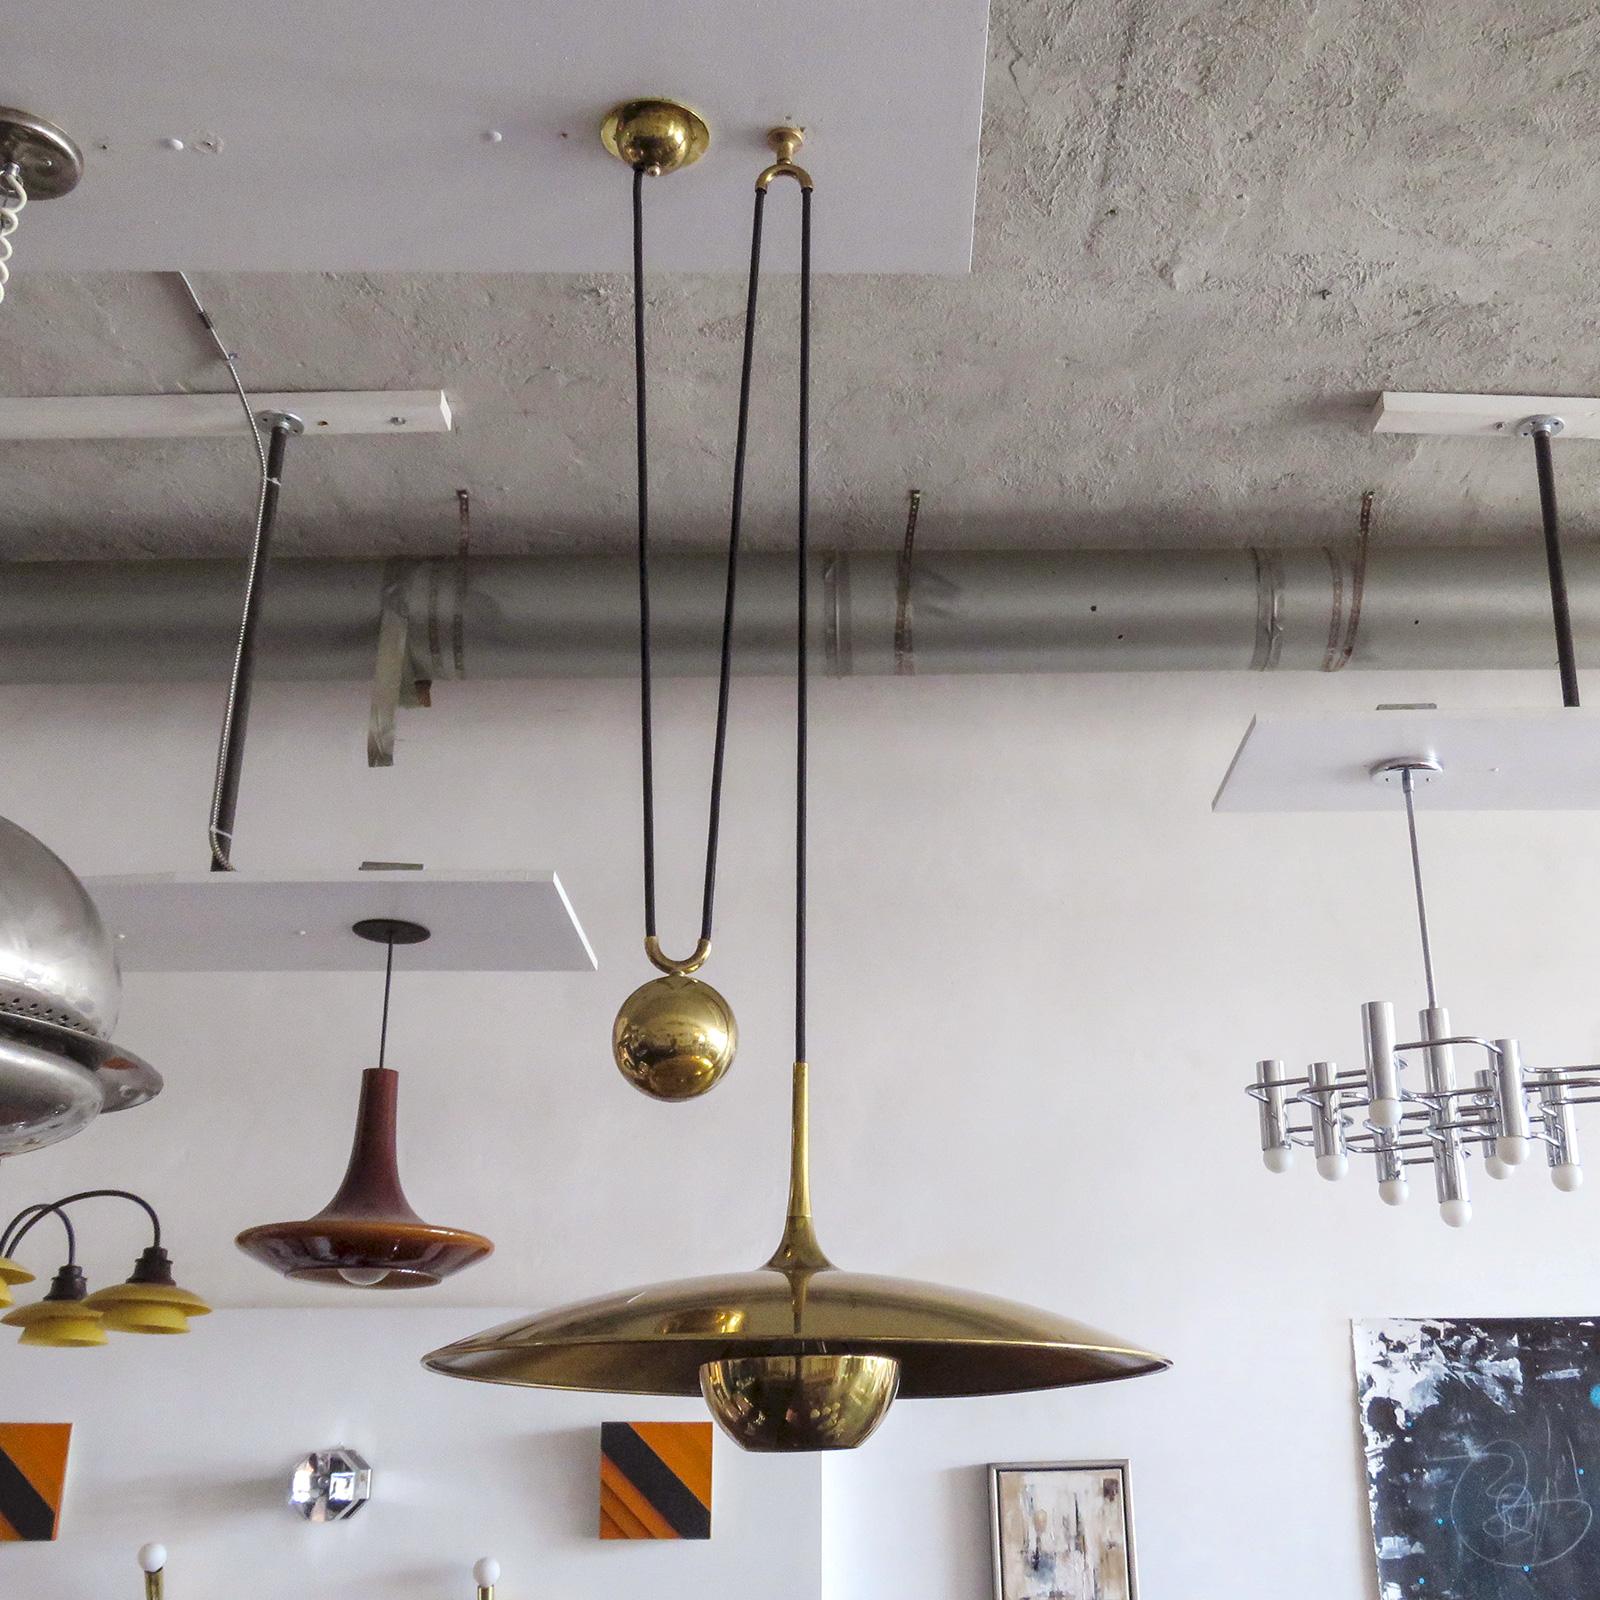 Wonderful large brass saucer pendant by Florian Schulz, Germany, with very heavy solid brass sphere counterweight pulley mechanism, current extension capability from 12